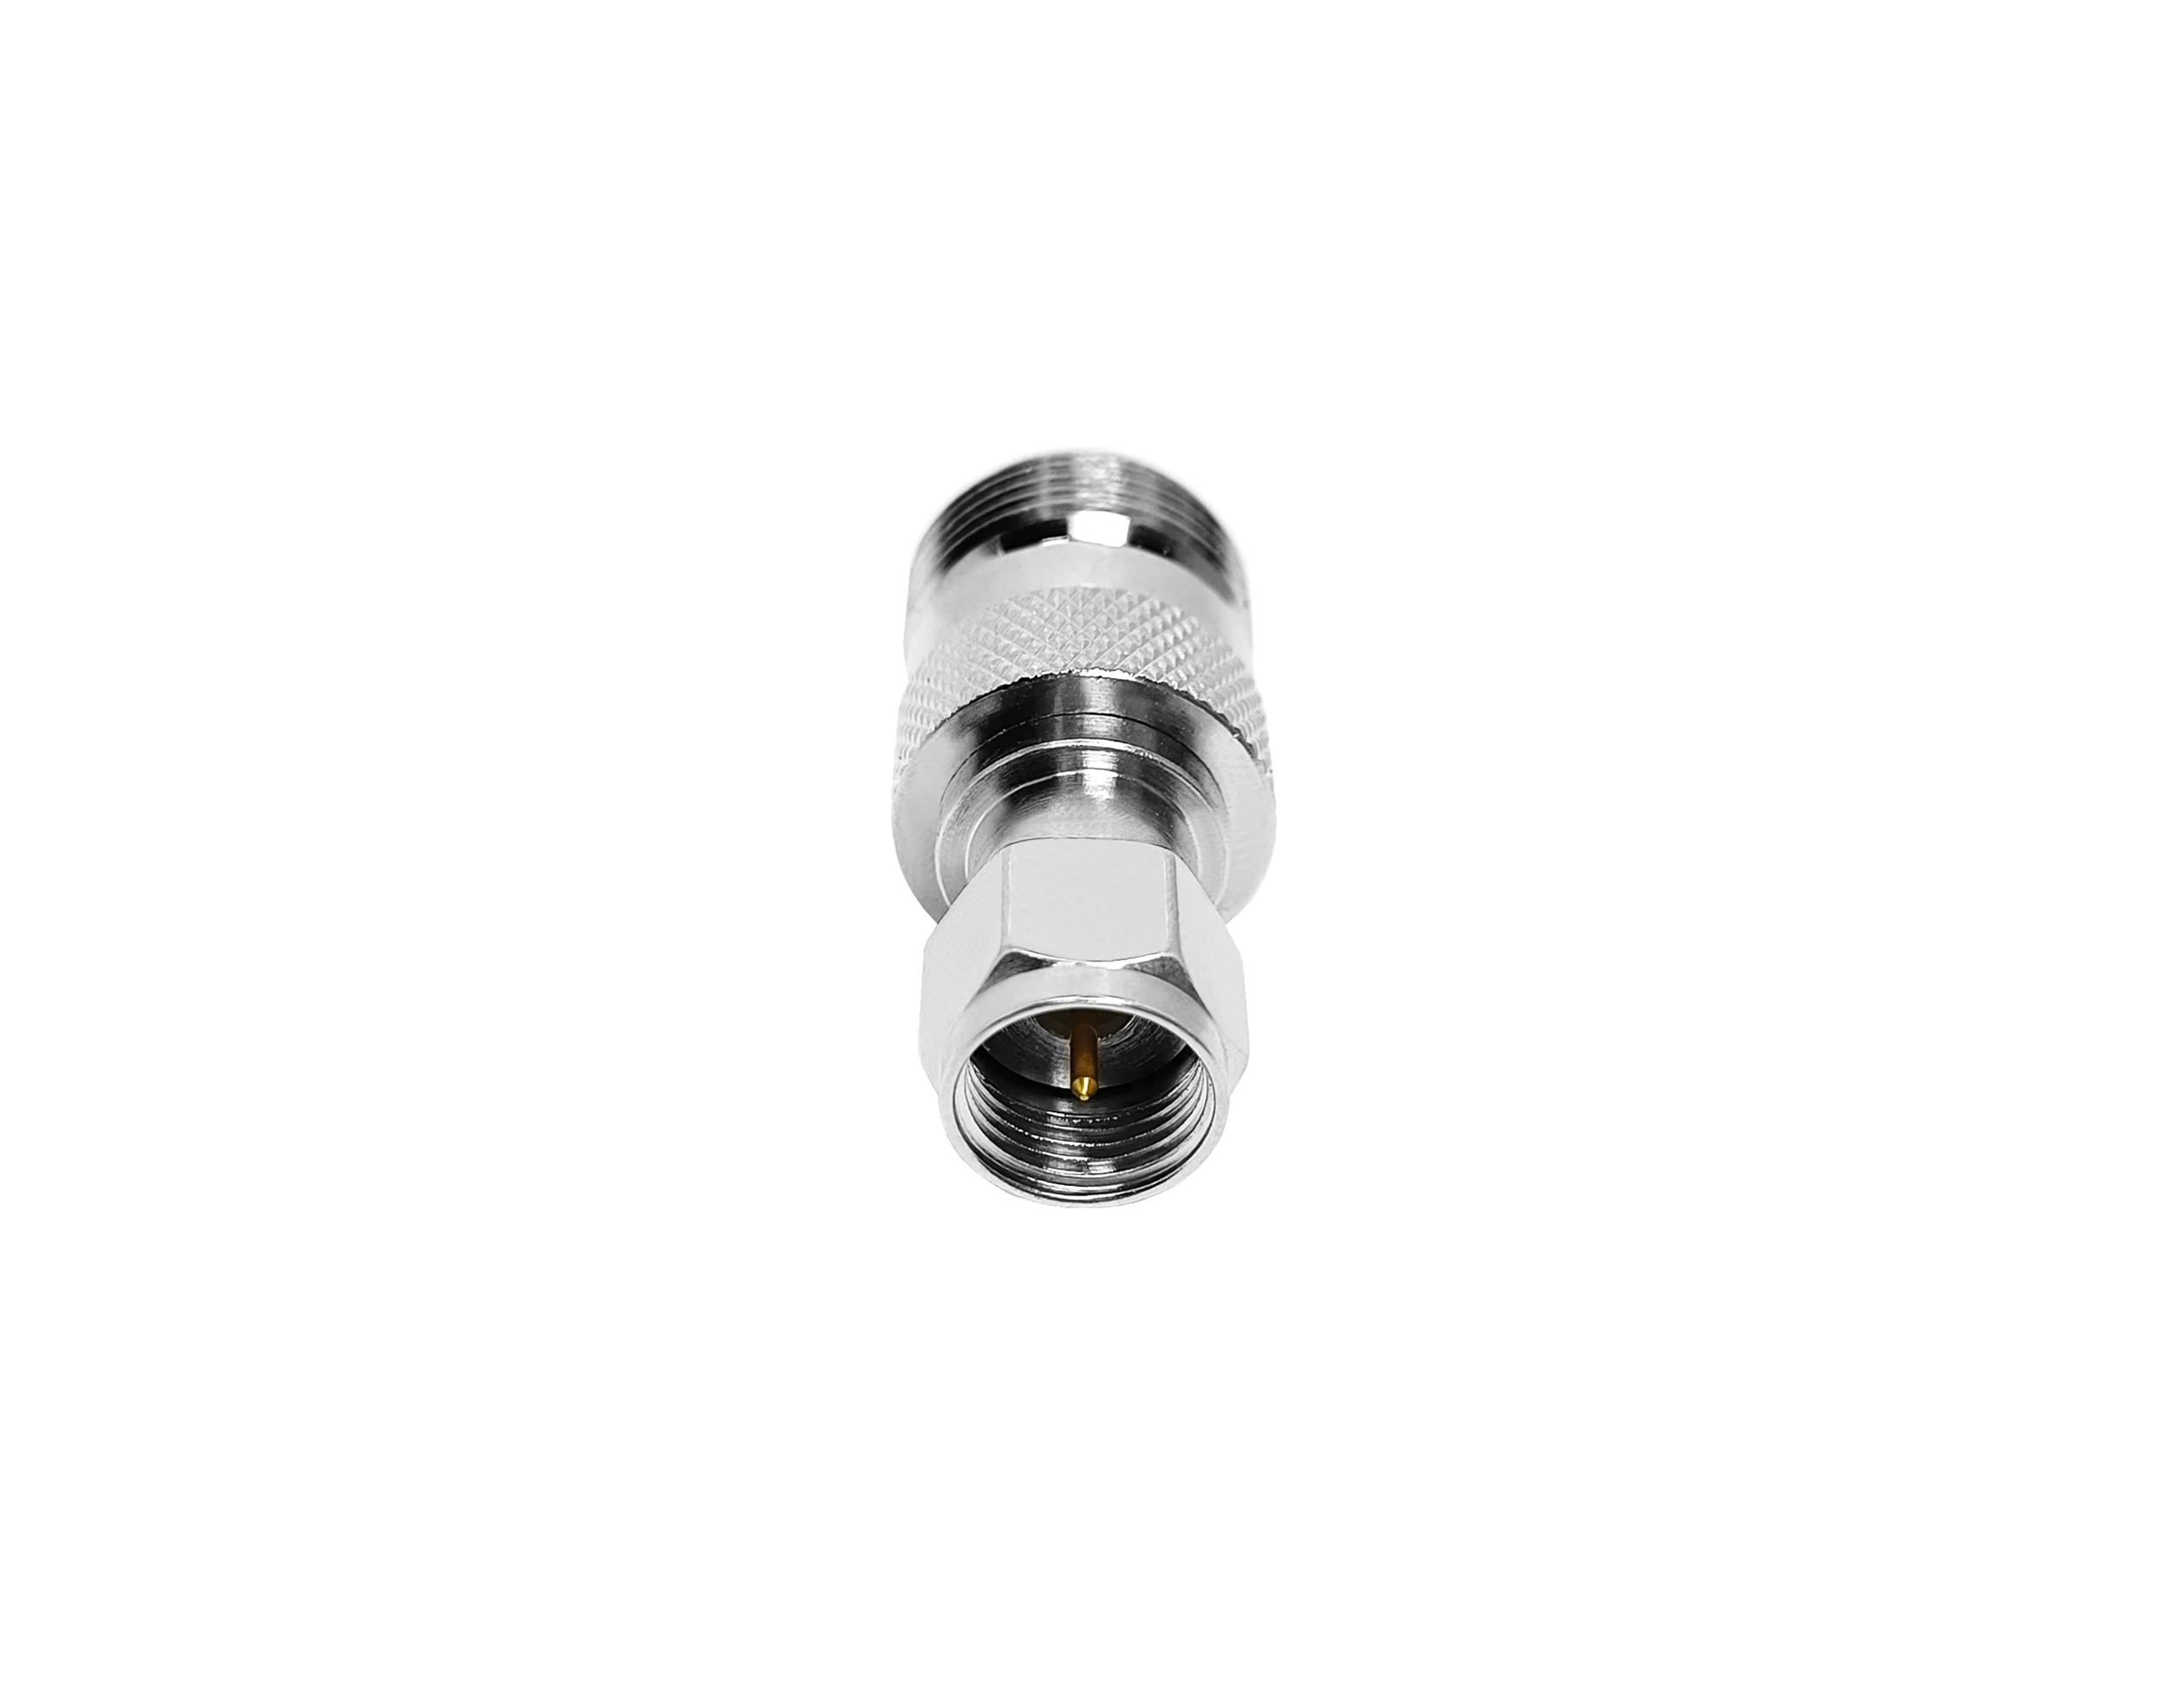 RF Antenna Adapter Connector N Female Jack to F Male Plug Adaptor factory